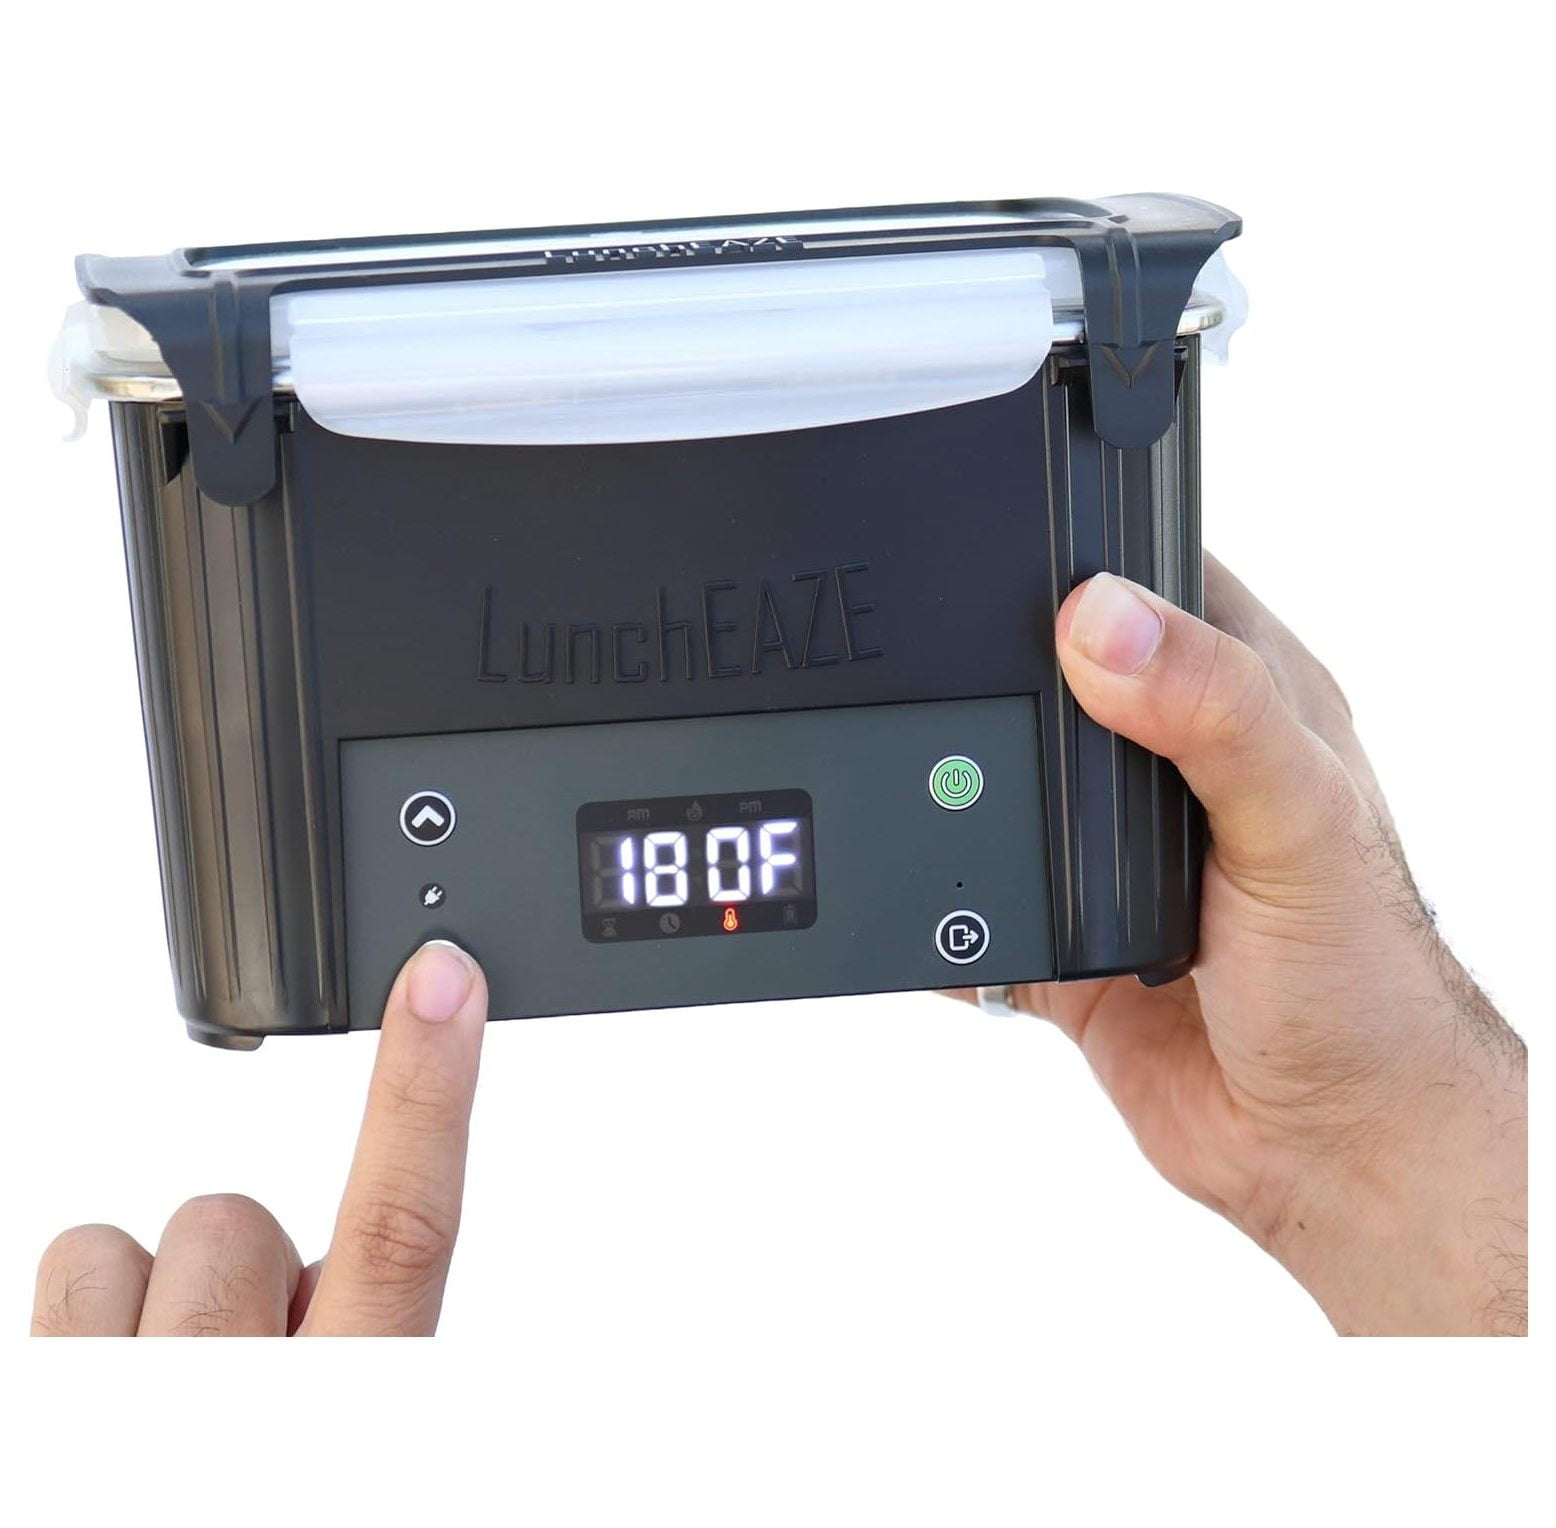  Customer reviews: LunchEAZE Electric Lunch Box – Self-Heating,  Cordless, Battery Powered Food Warmer for Work, Travel, Students – 220°F  Heat, BPA Free, Meal Prep Friendly with Bluetooth Connectivity